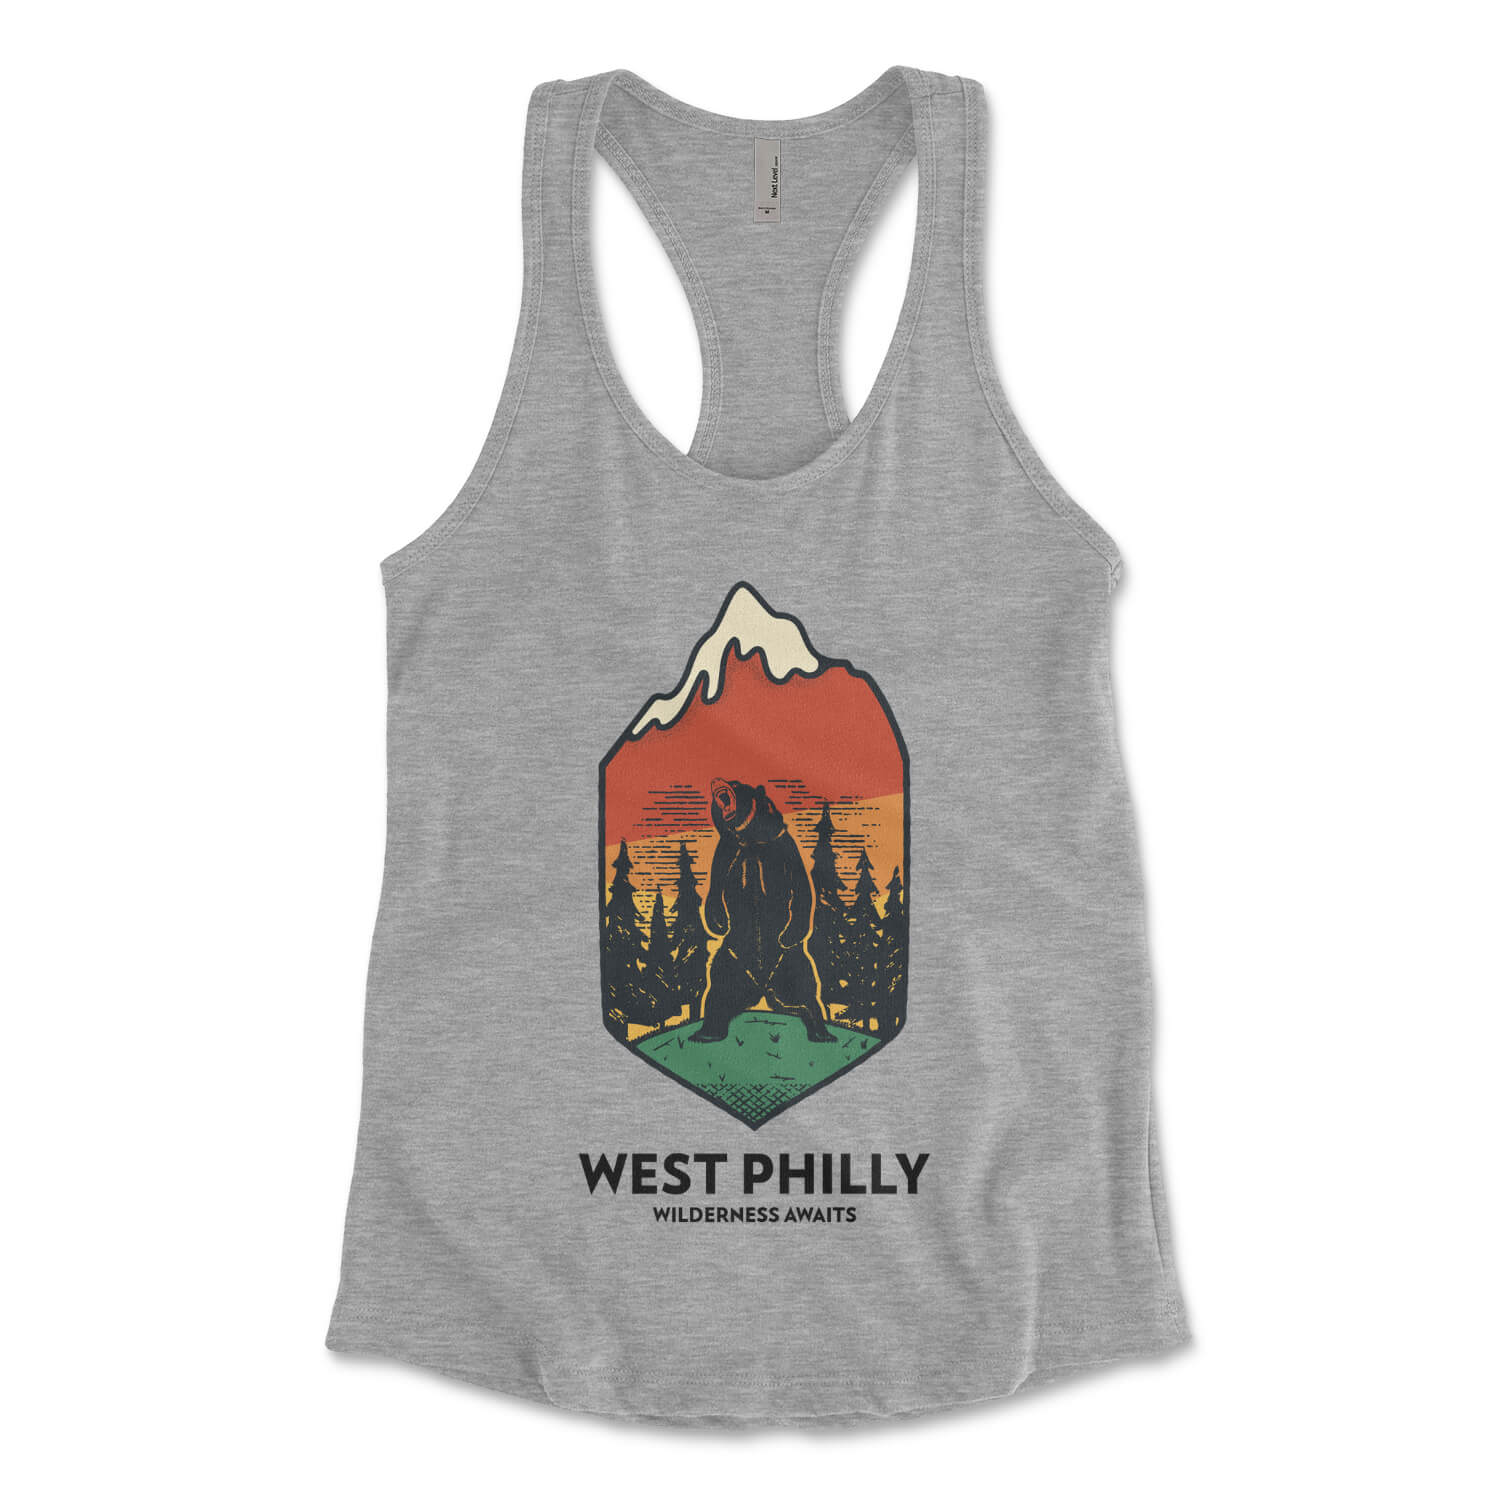 West Philadelphia wilderness awaits bear in the west philly wild on a womens heather grey racerback tank top from Phillygoat